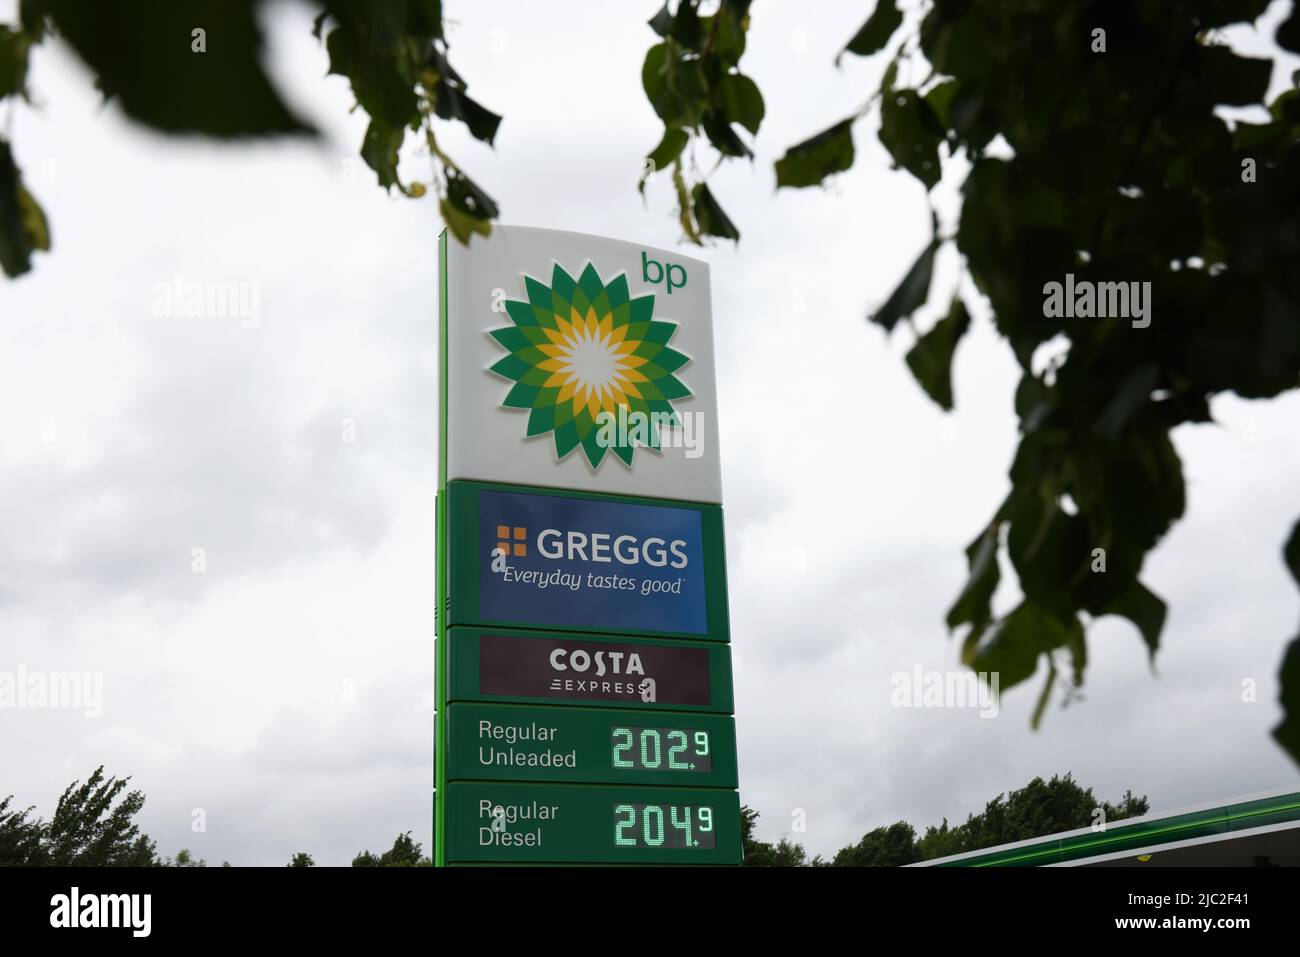 Castle Donington, Leicestershire, UK. 9th June 2022.  Fuel prices are displayed at a BP service station after the cost of filling an average family car with petrol has hit £100 for the first time. Credit Darren Staples/Alamy Live News. Stock Photo